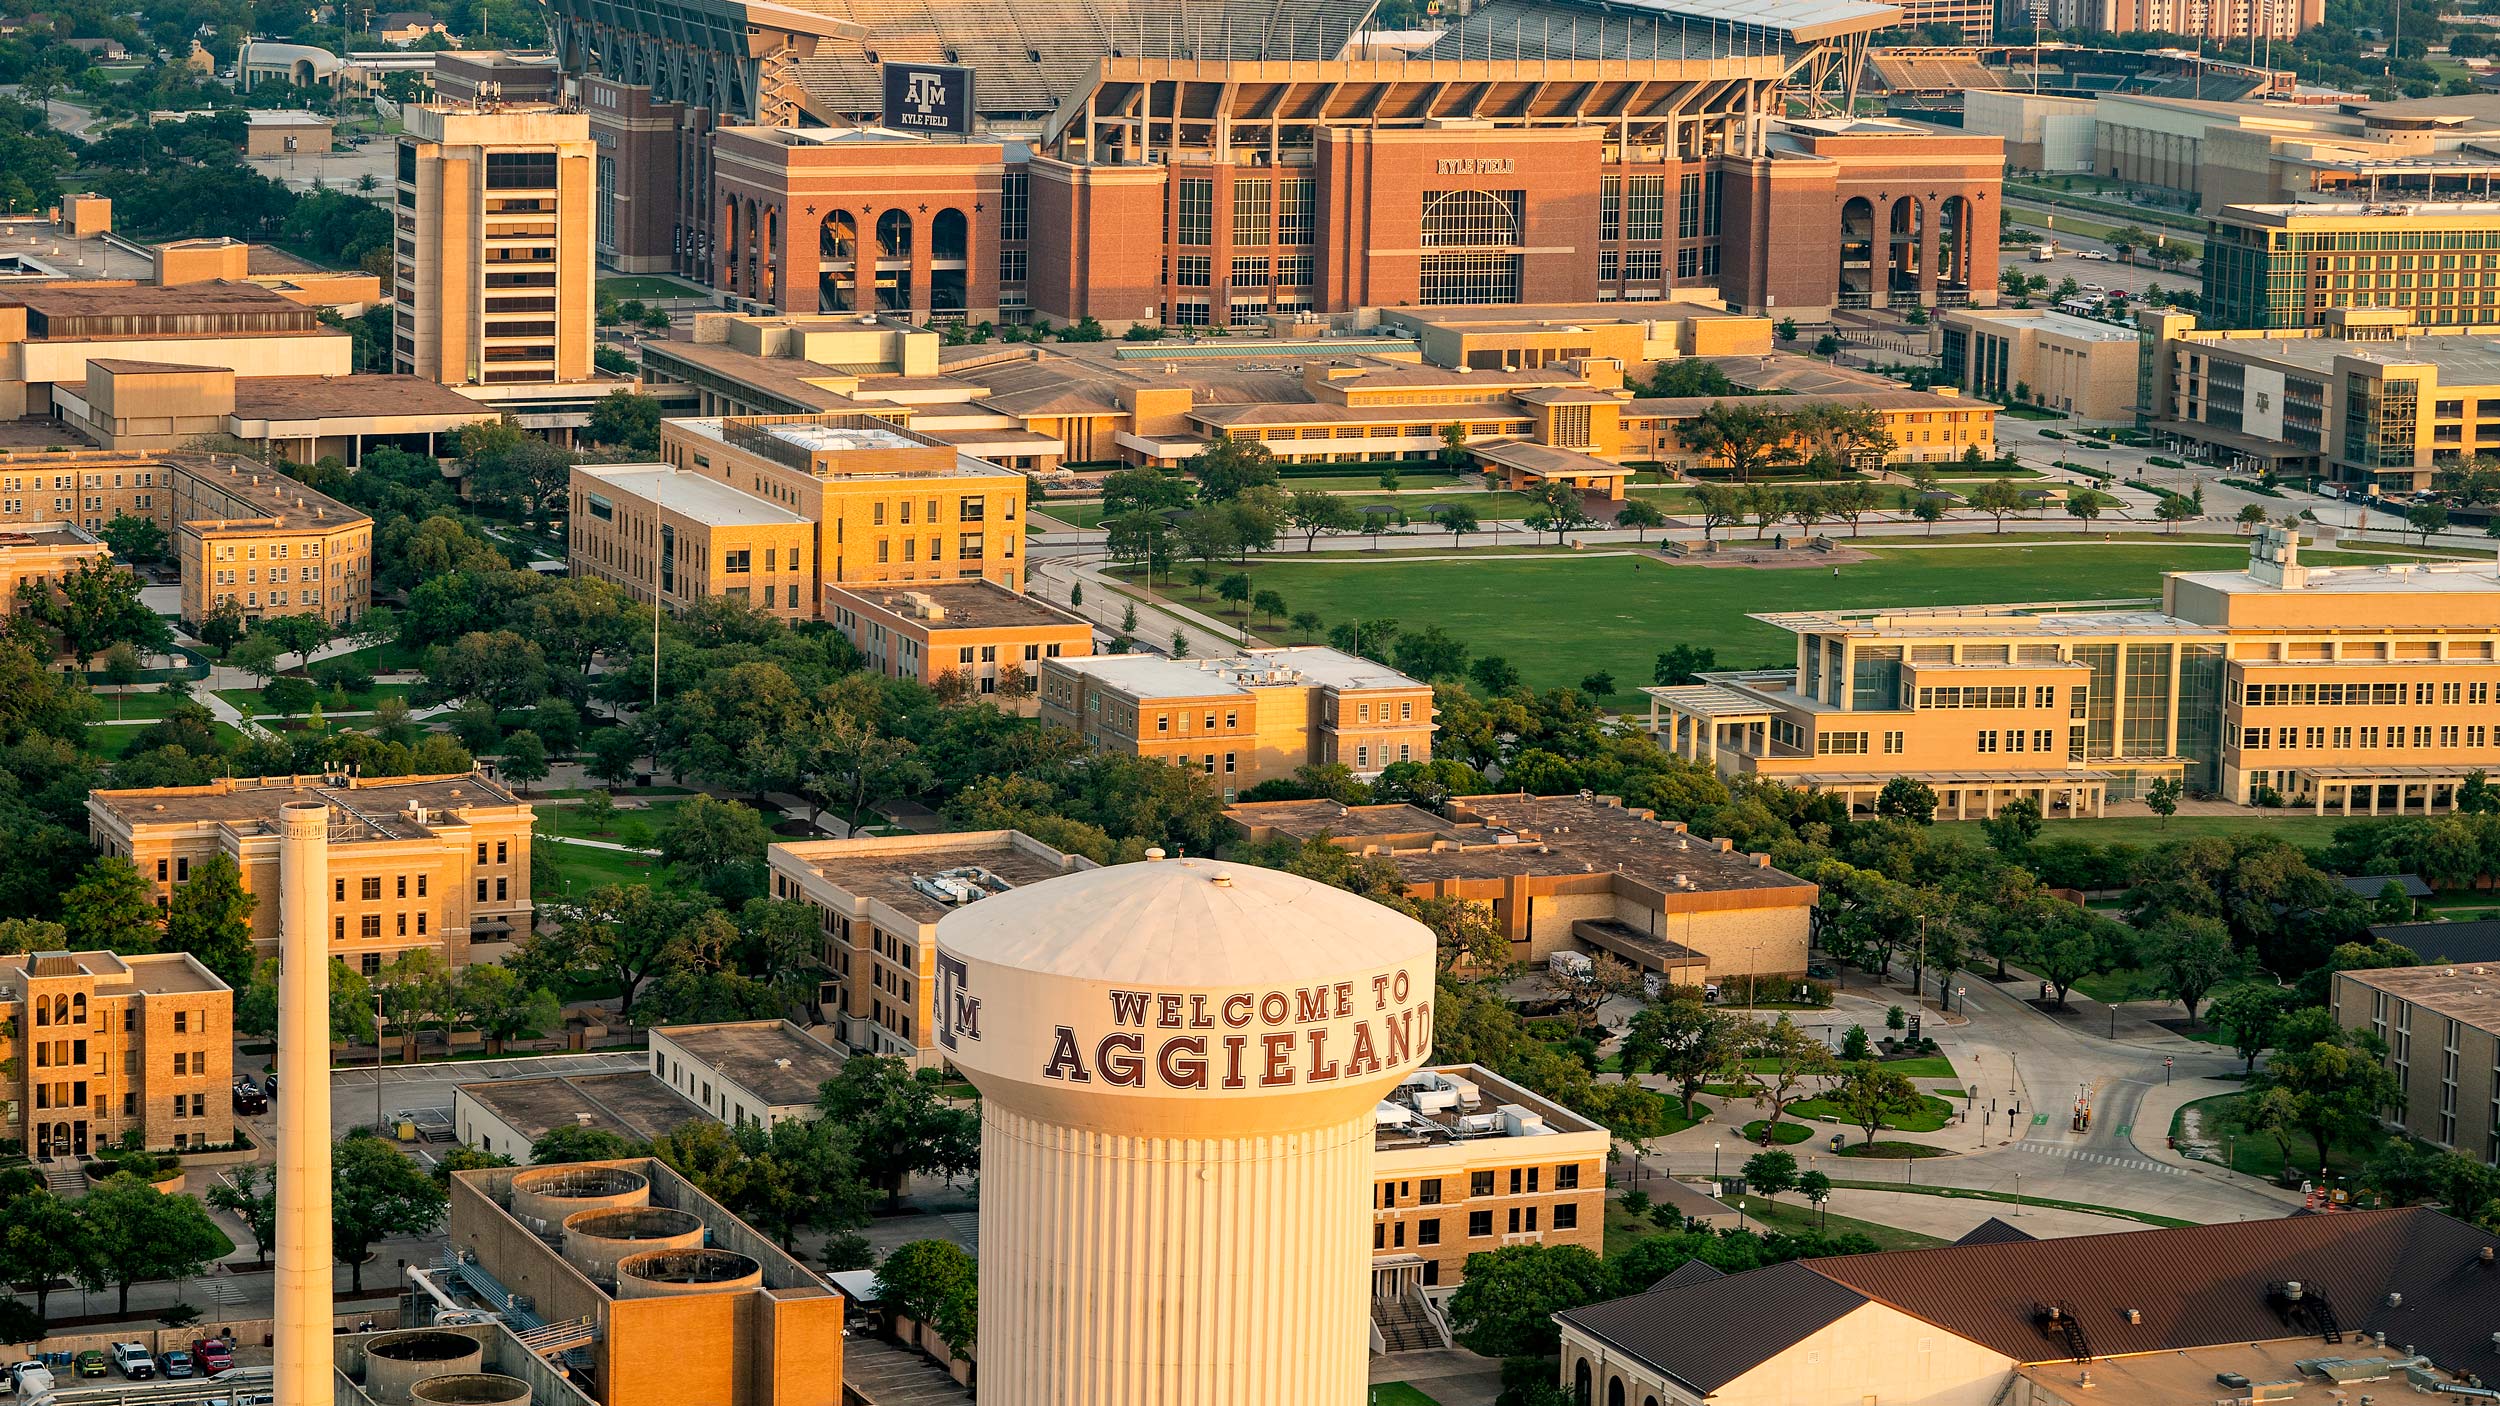 An aerial of Texas A&M University campus